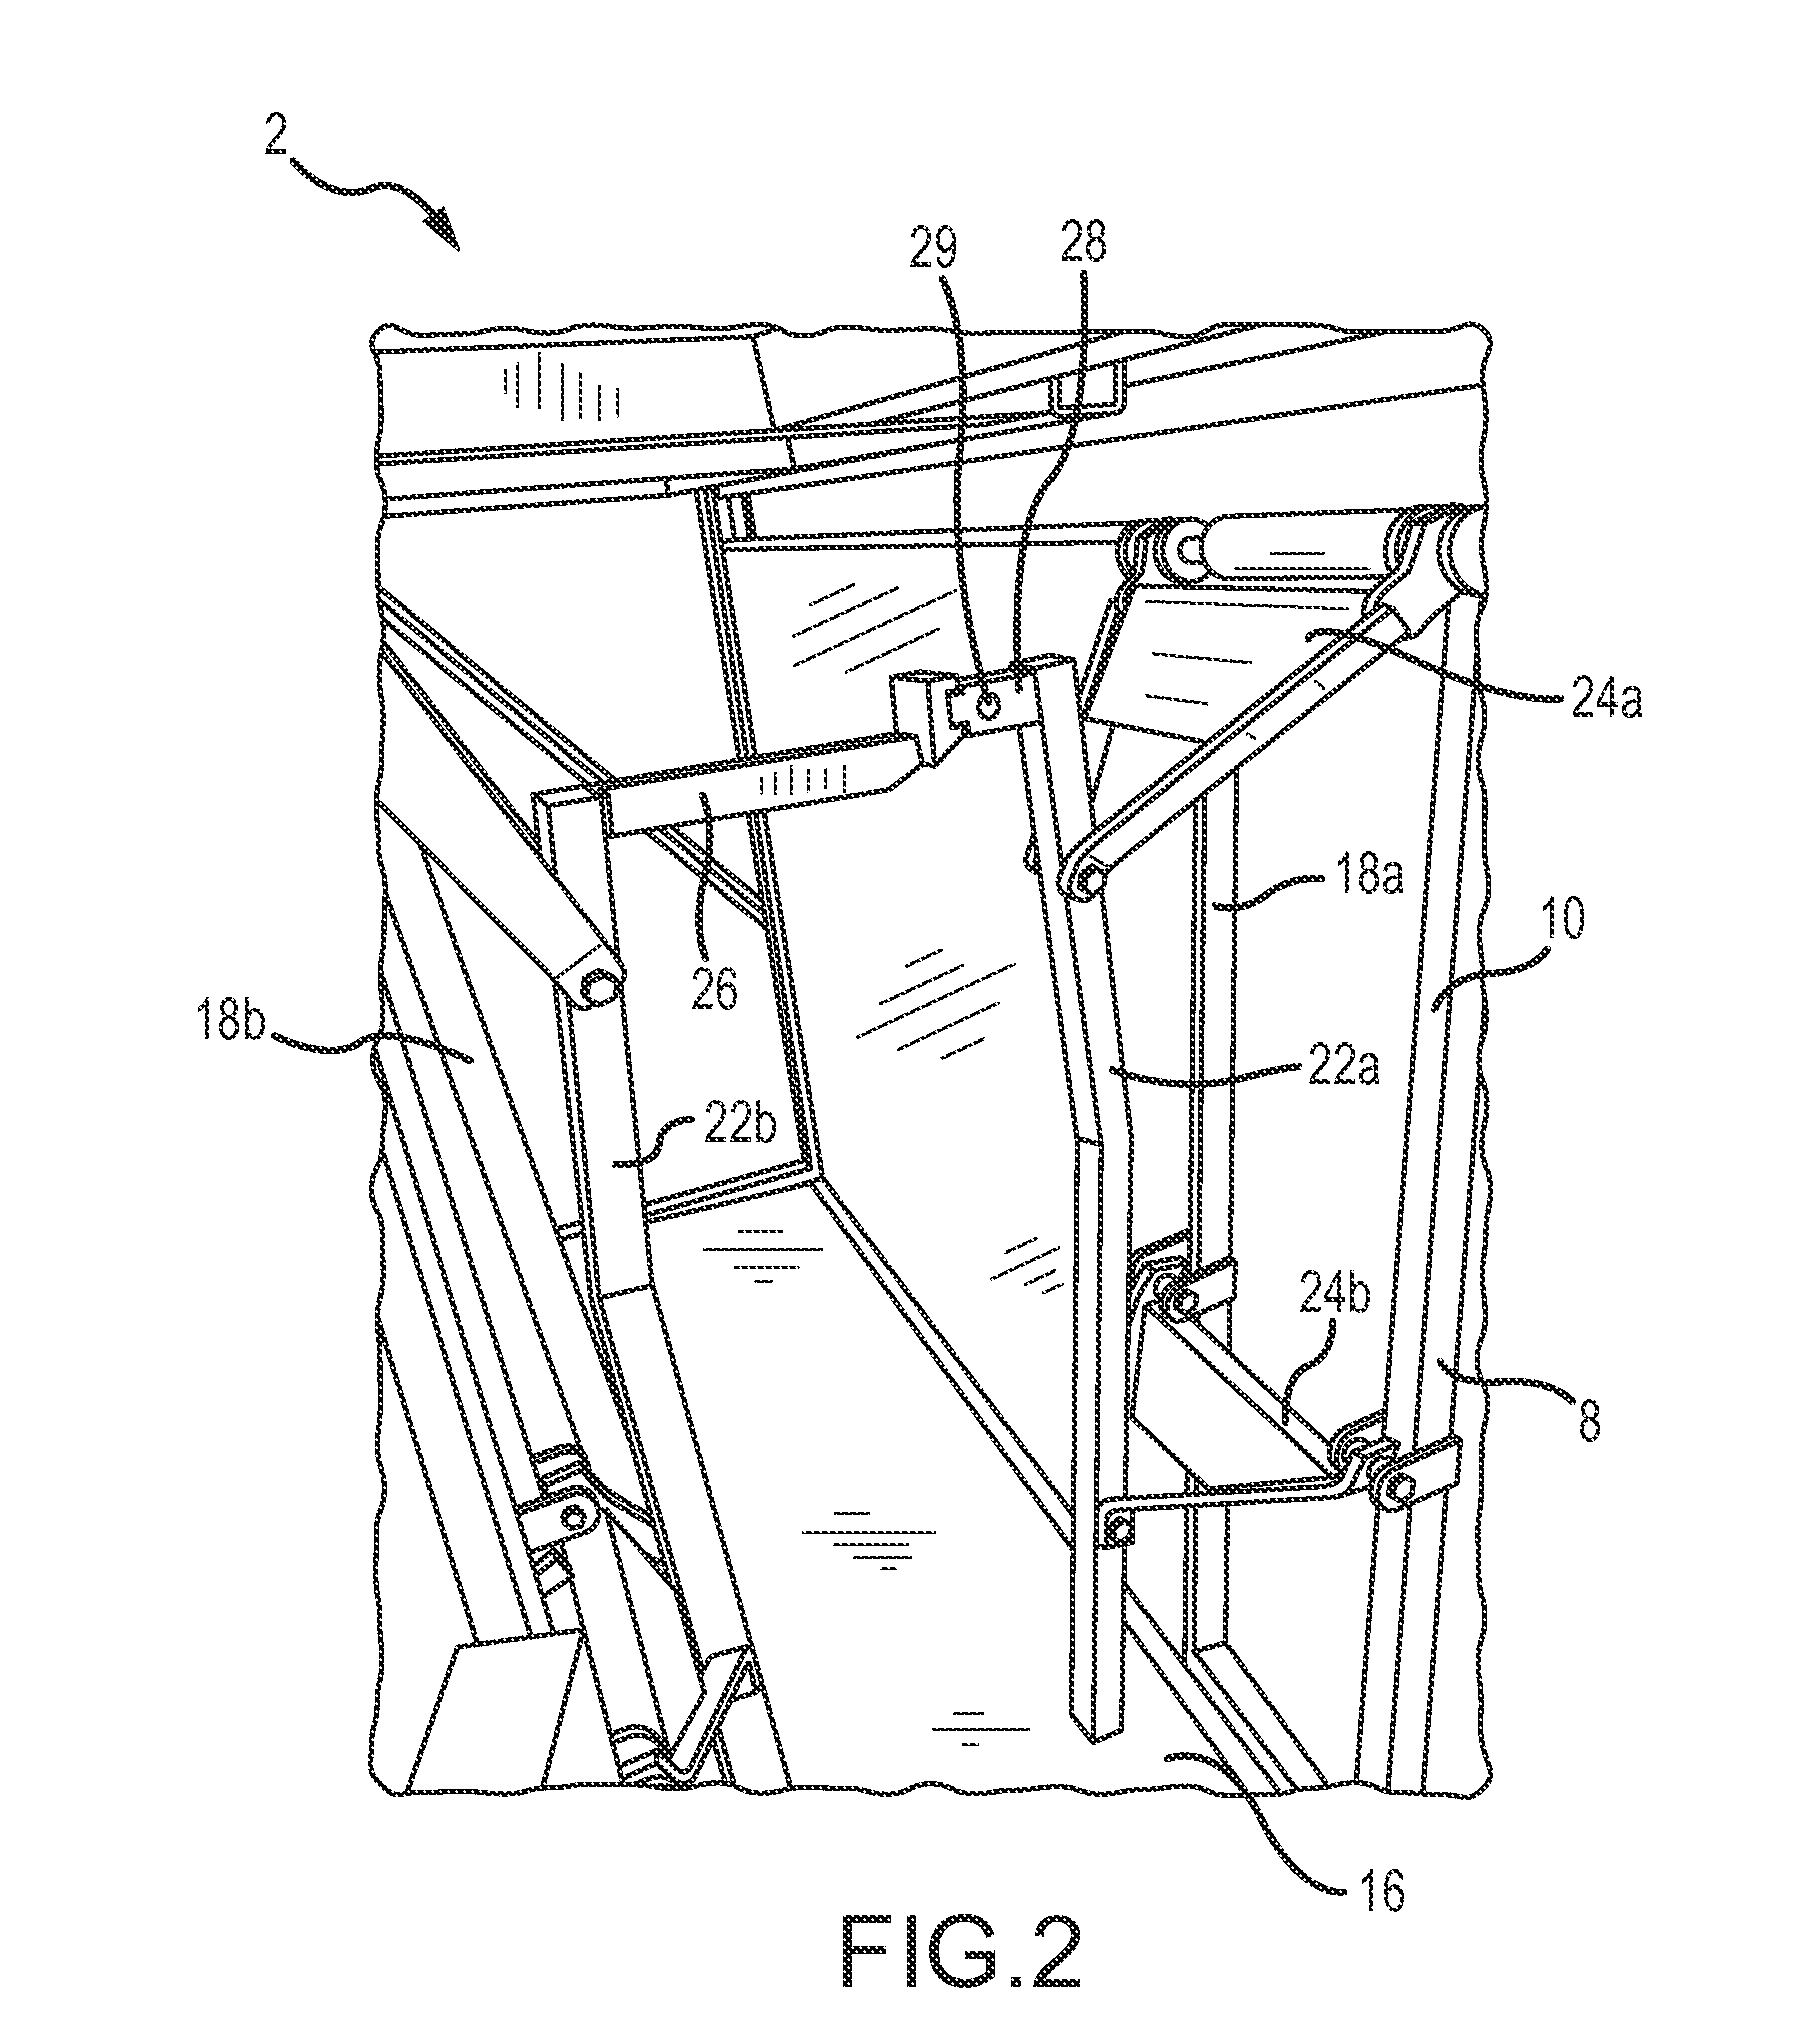 System and method for restraining and handling livestock